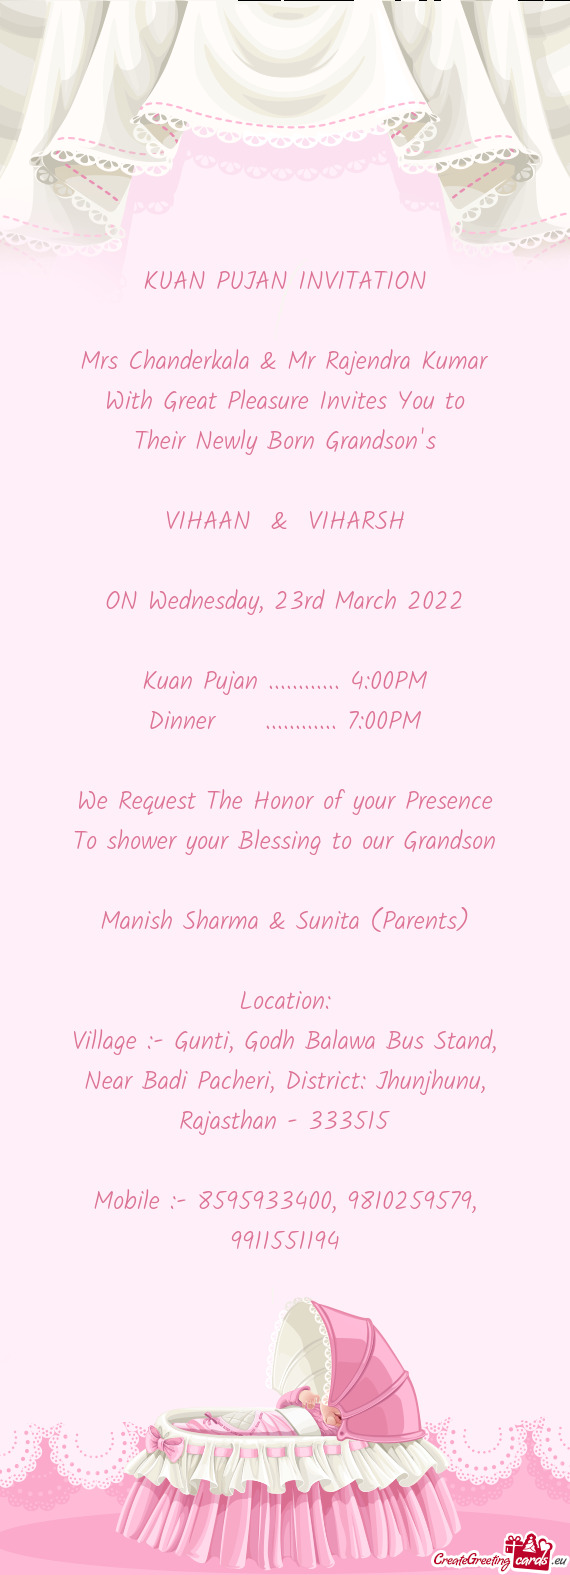 00PM
 
 We Request The Honor of your Presence
 To shower your Blessing to our Grandson
 
 Manish Sha